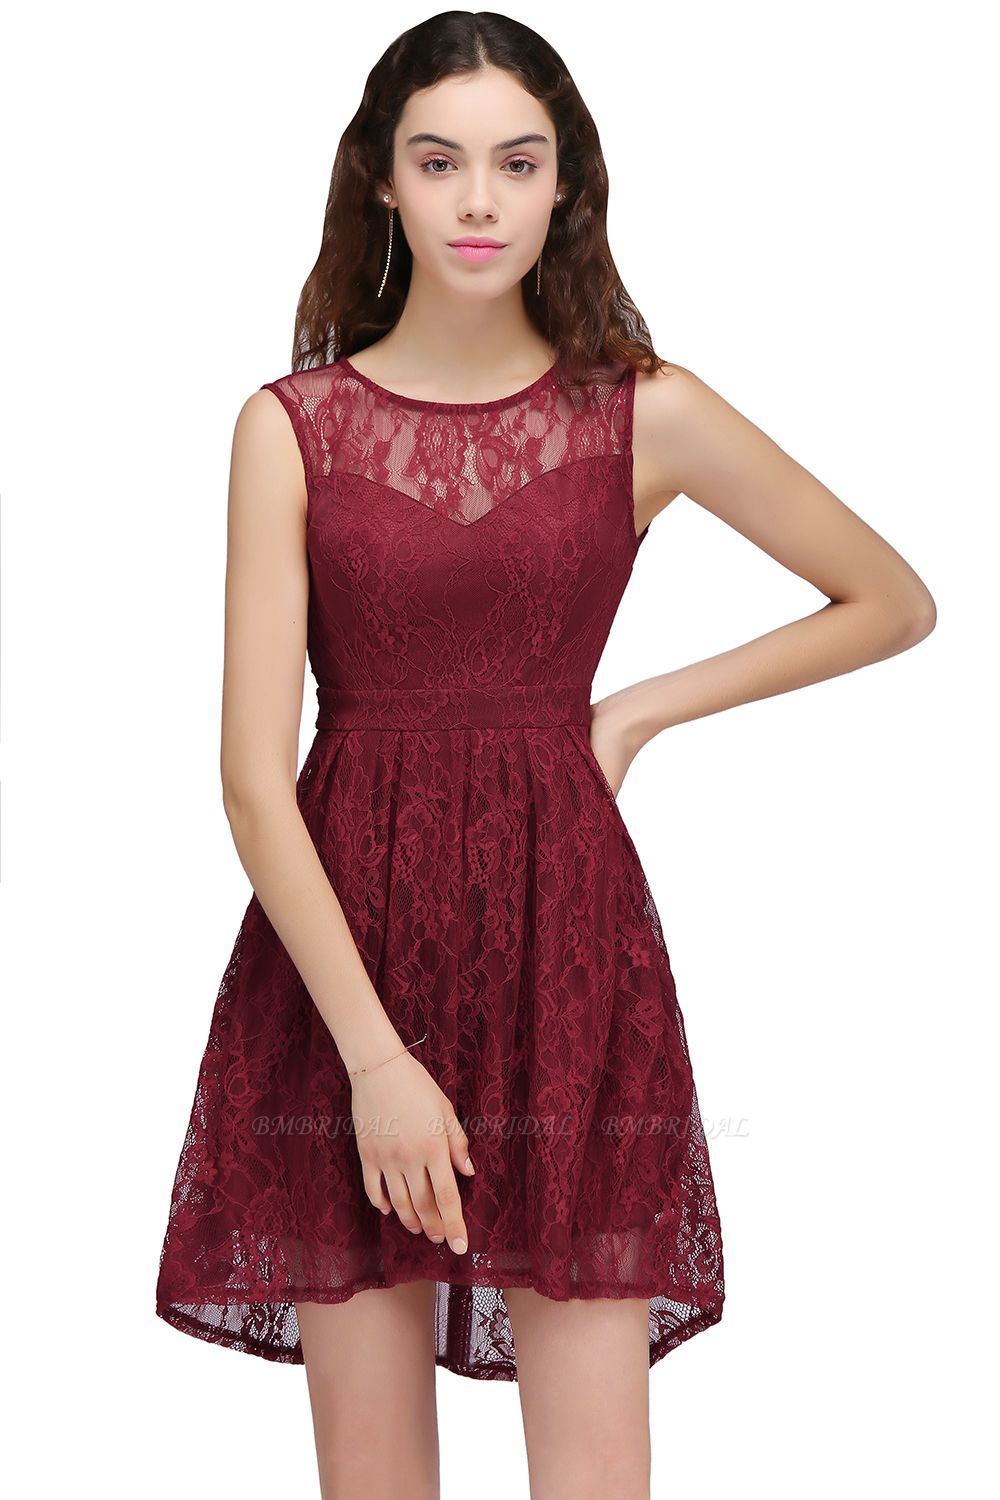 BMbridal A-Line Round Neck Short Lace Burgundy Homecoming Dress